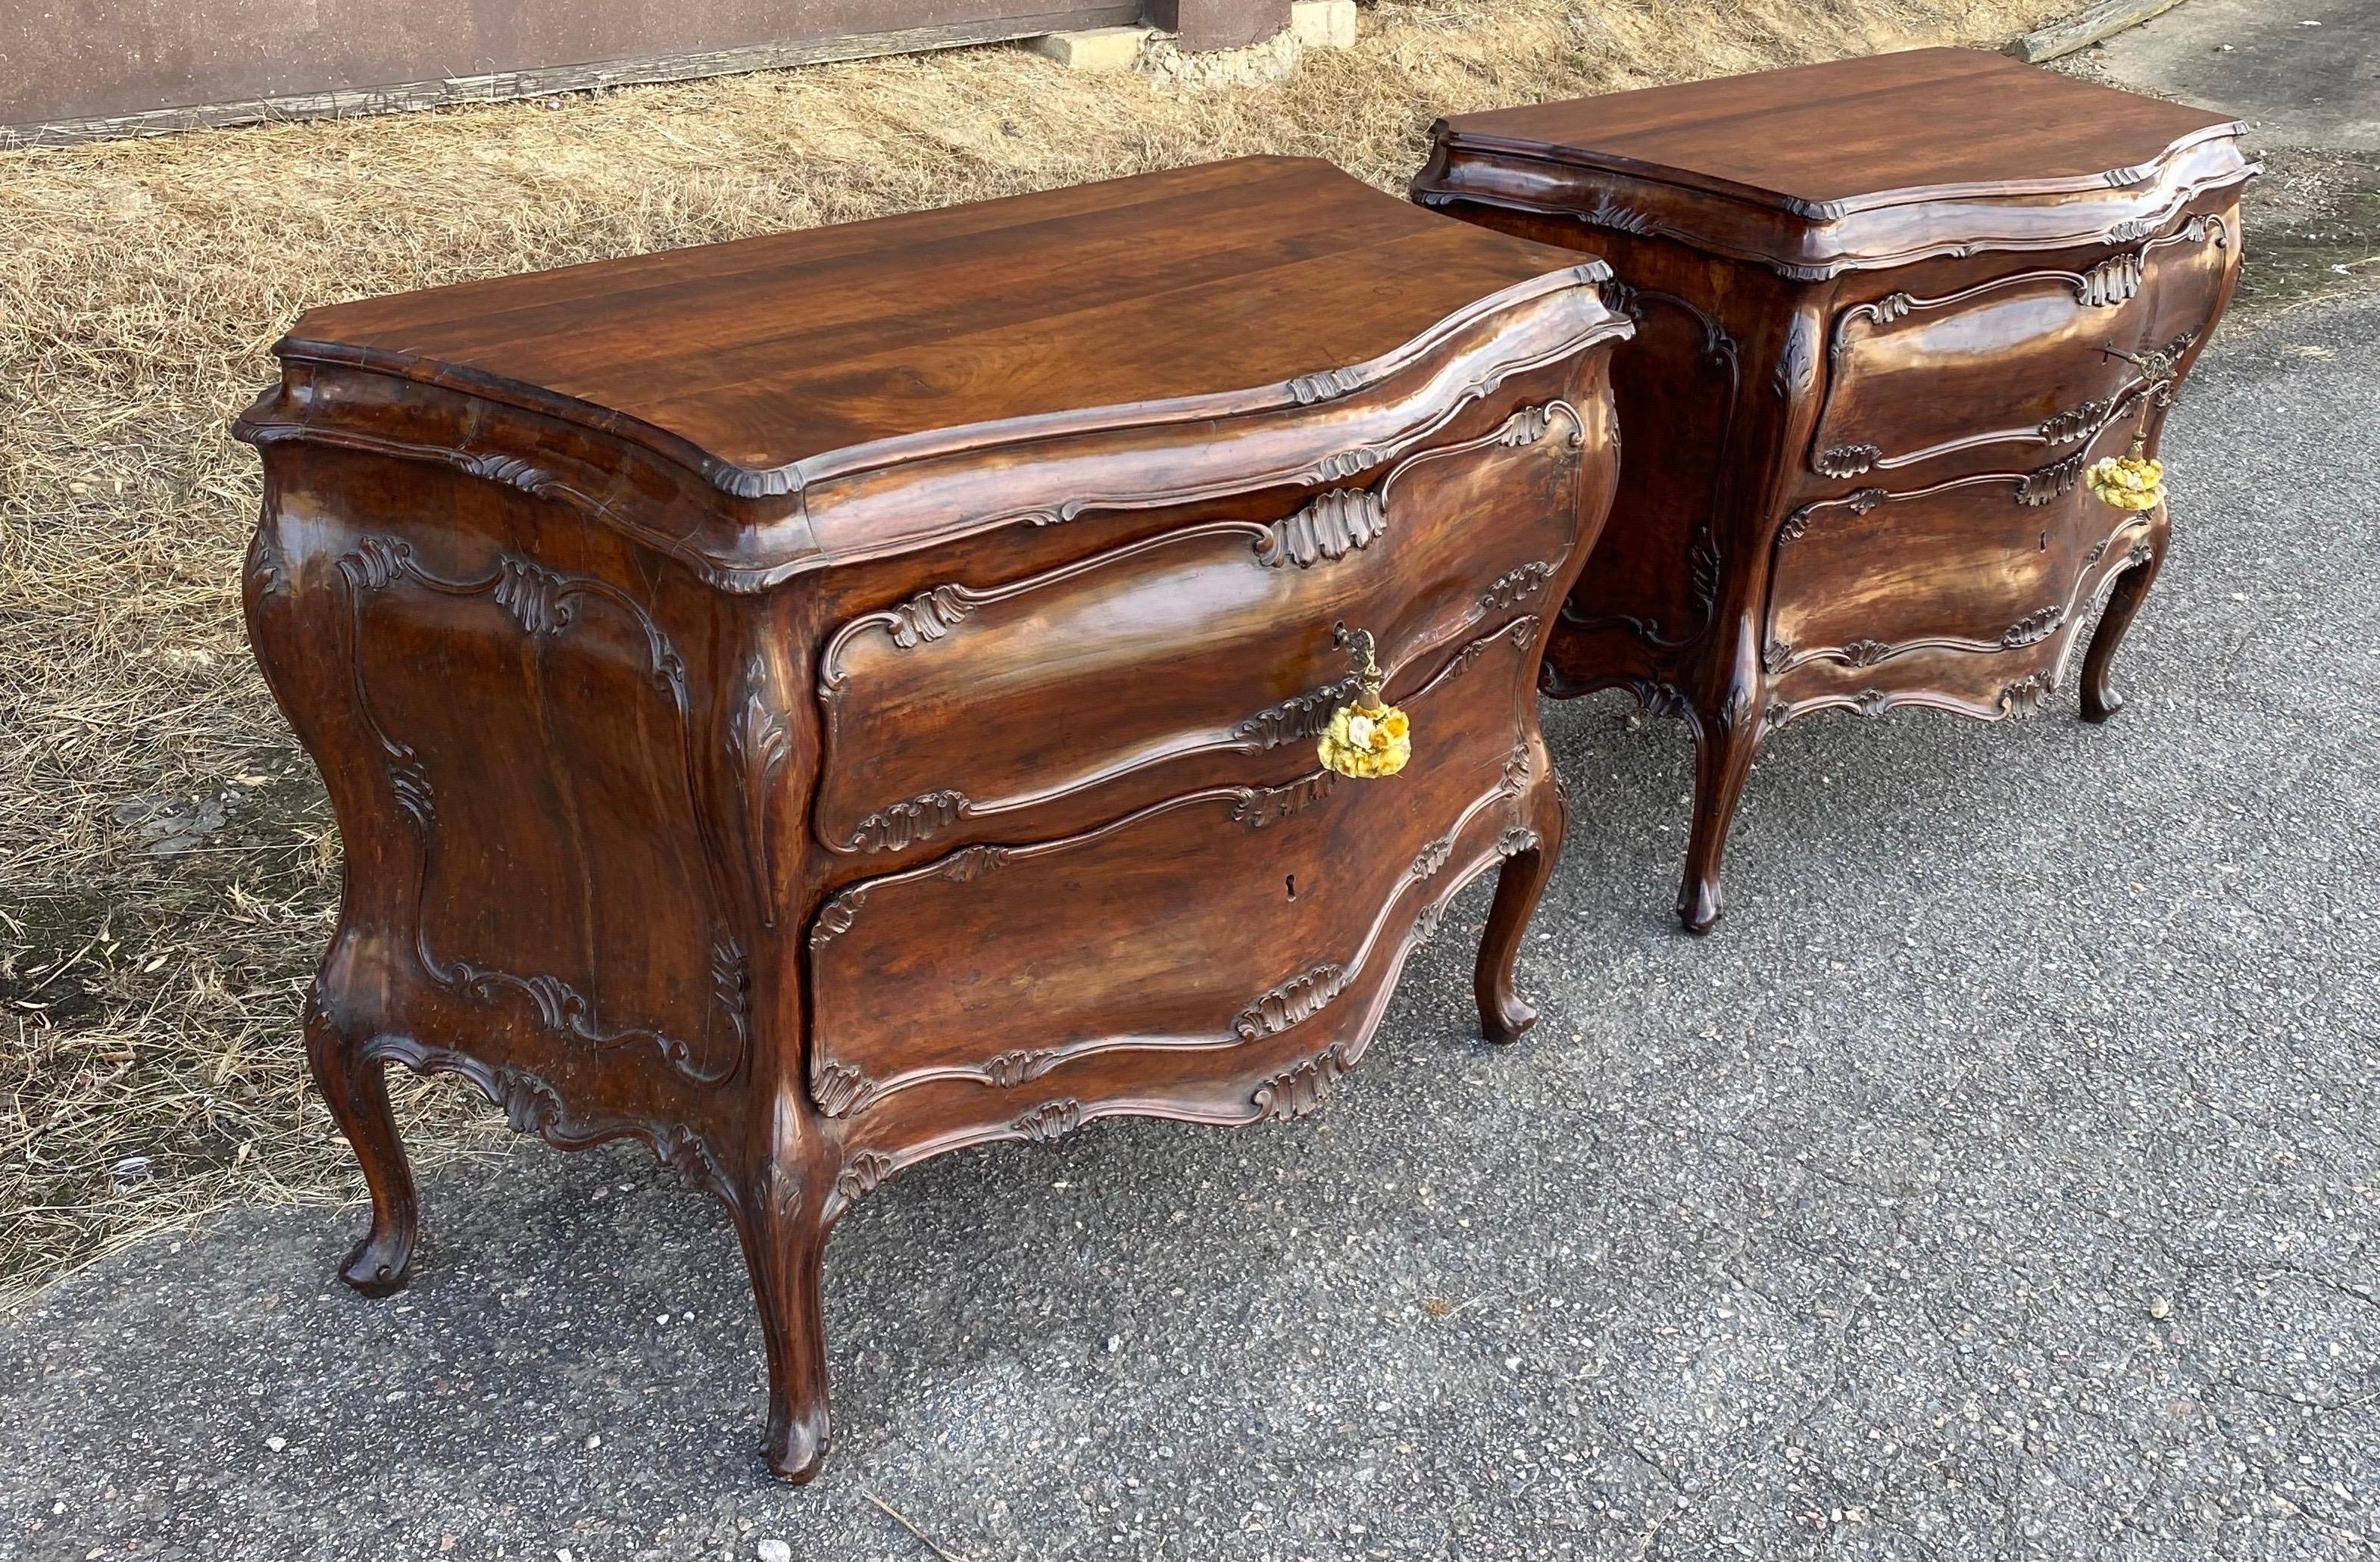 Fine pair of 18th century Venetian Rococo bombe bedside chests of drawers. Serpentine form, scrolled feet, carved drawers, original locks. The height on these beauties are perfect to use as side tables or bedside chests.